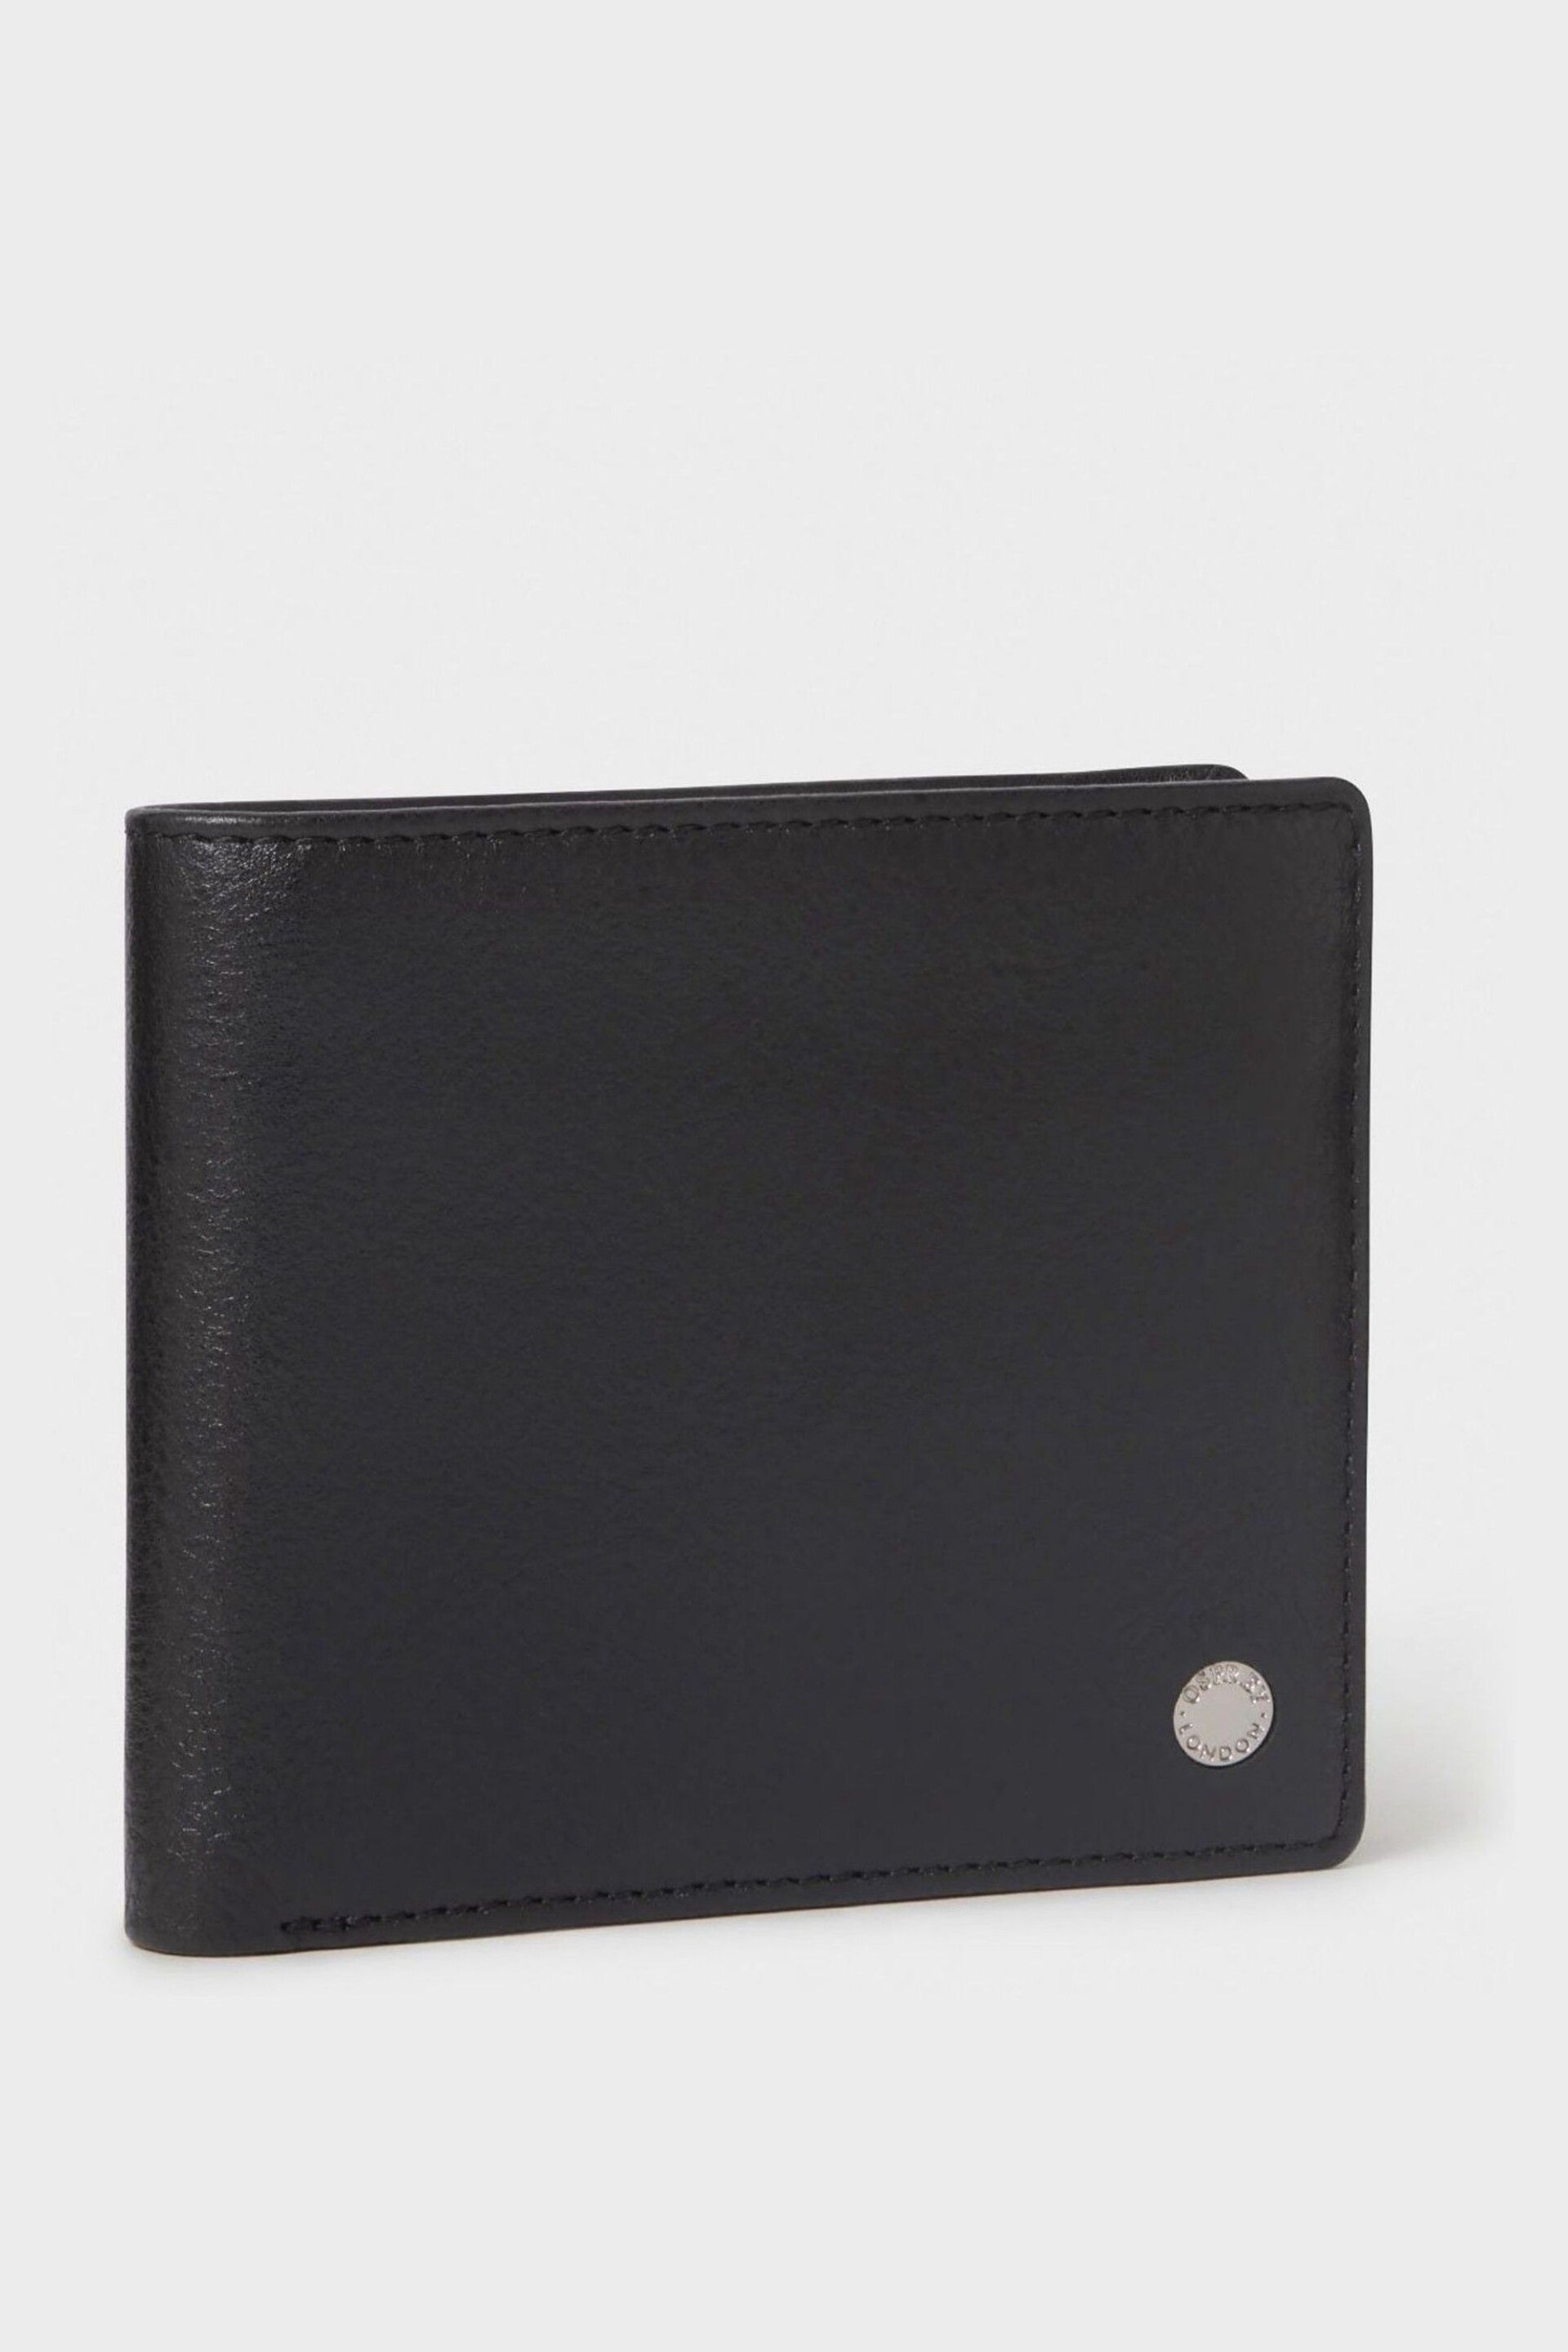 Osprey London Large Business Class E/W Coin Wallet - Image 3 of 5